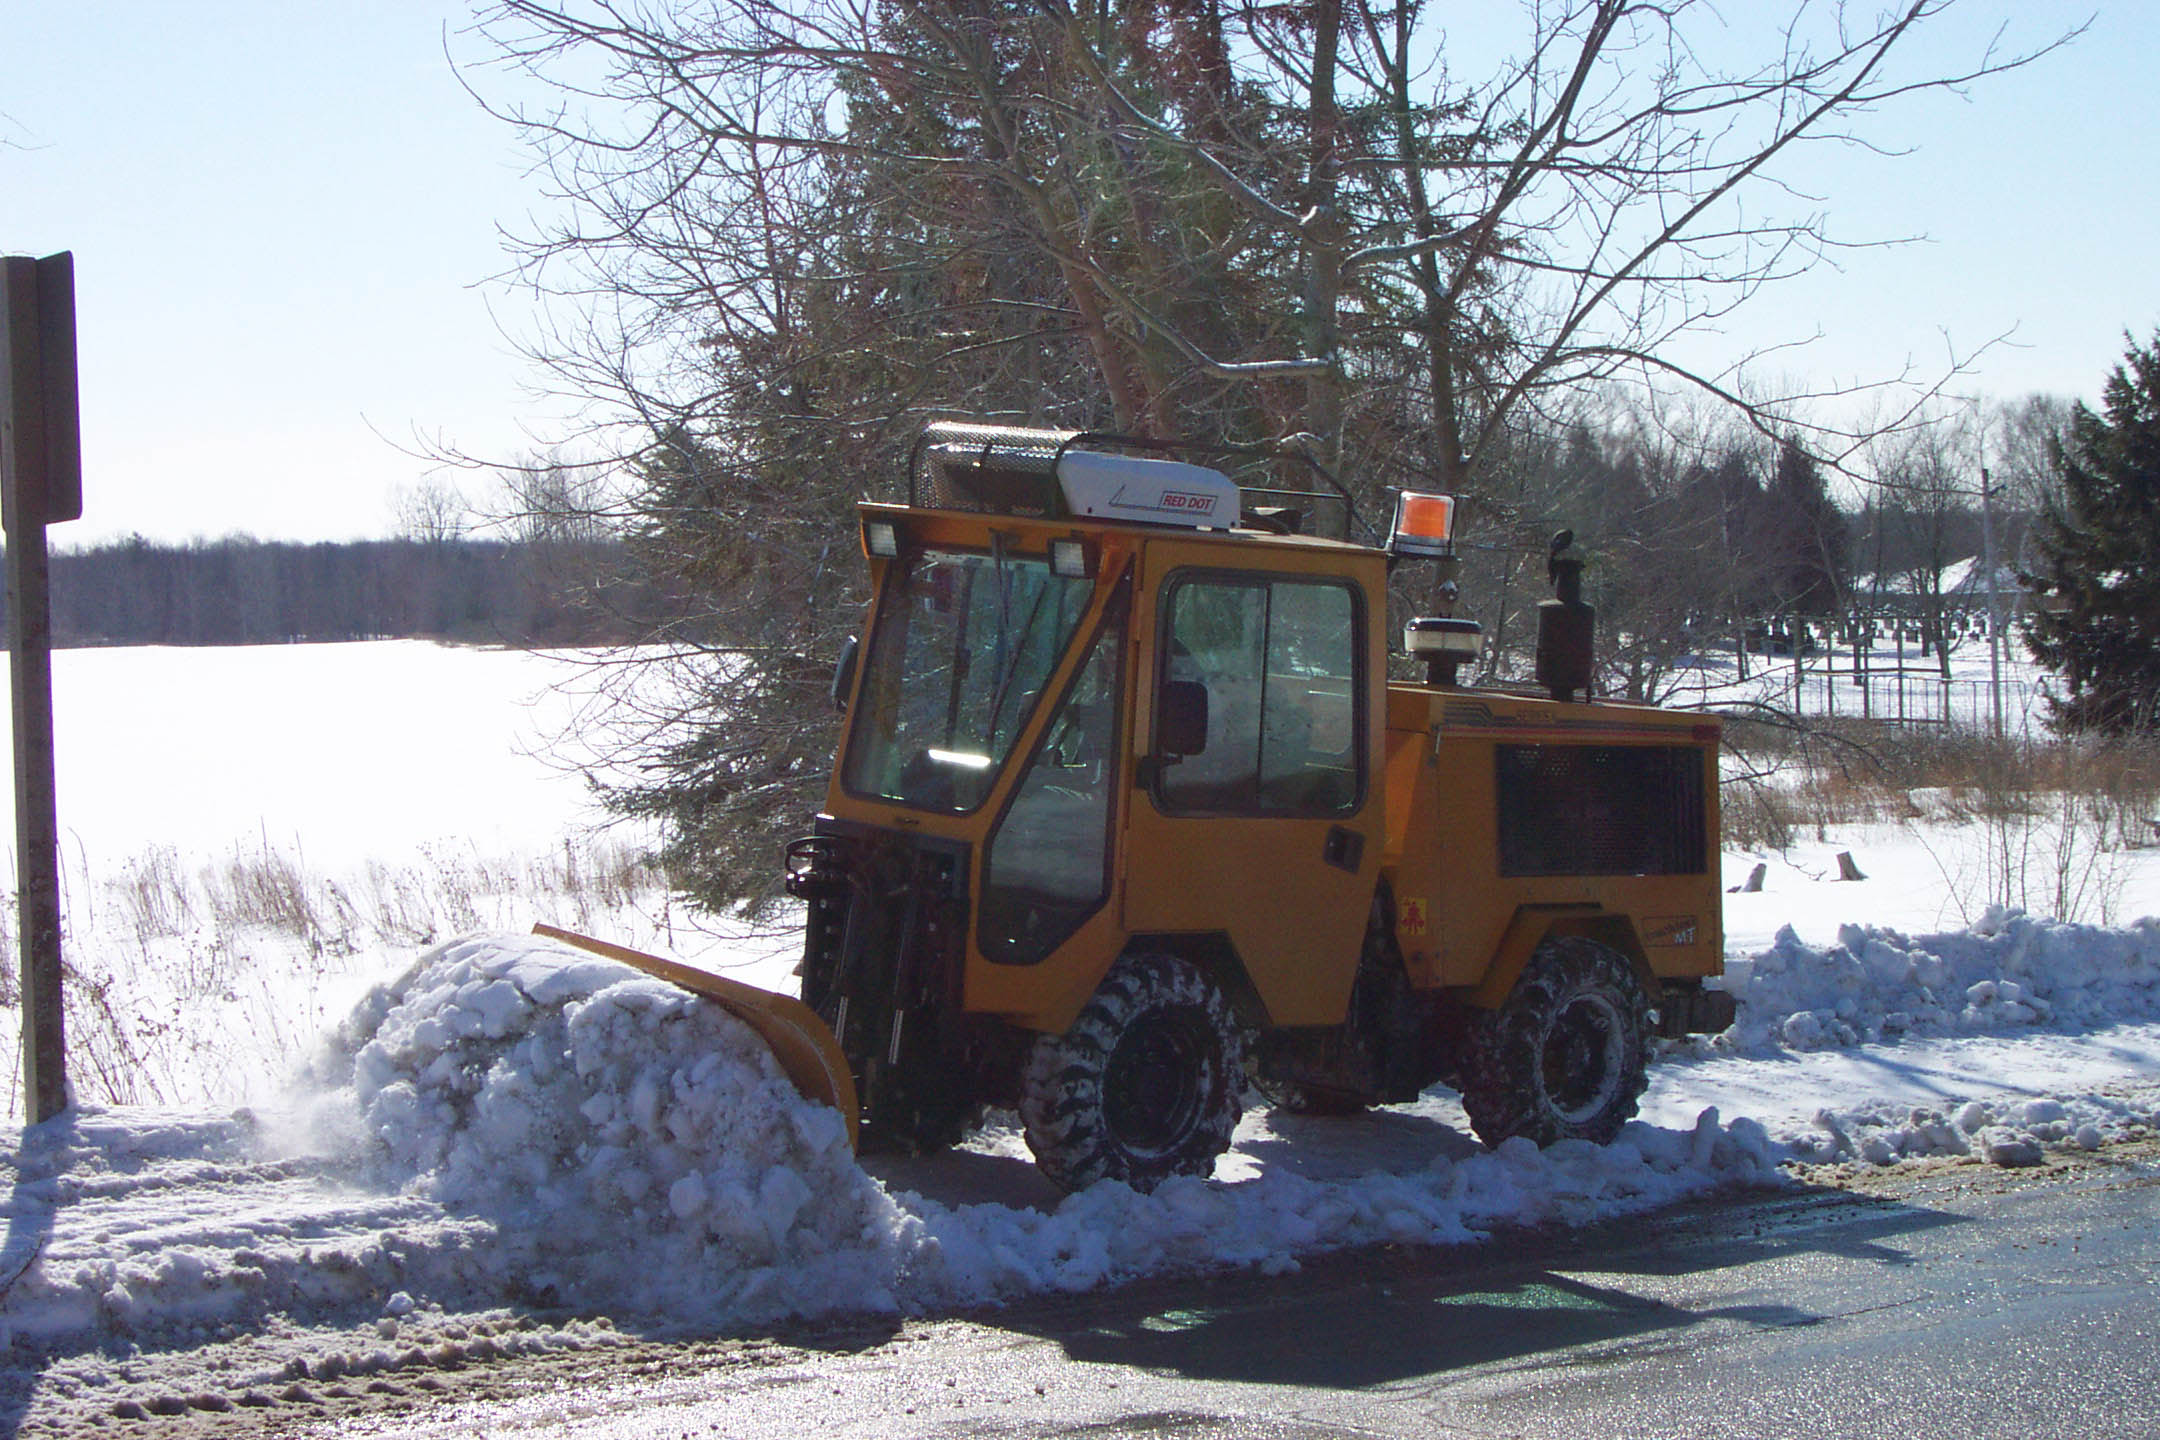 trackless vehicles mt5 tractor machine and angle plow plowing snow